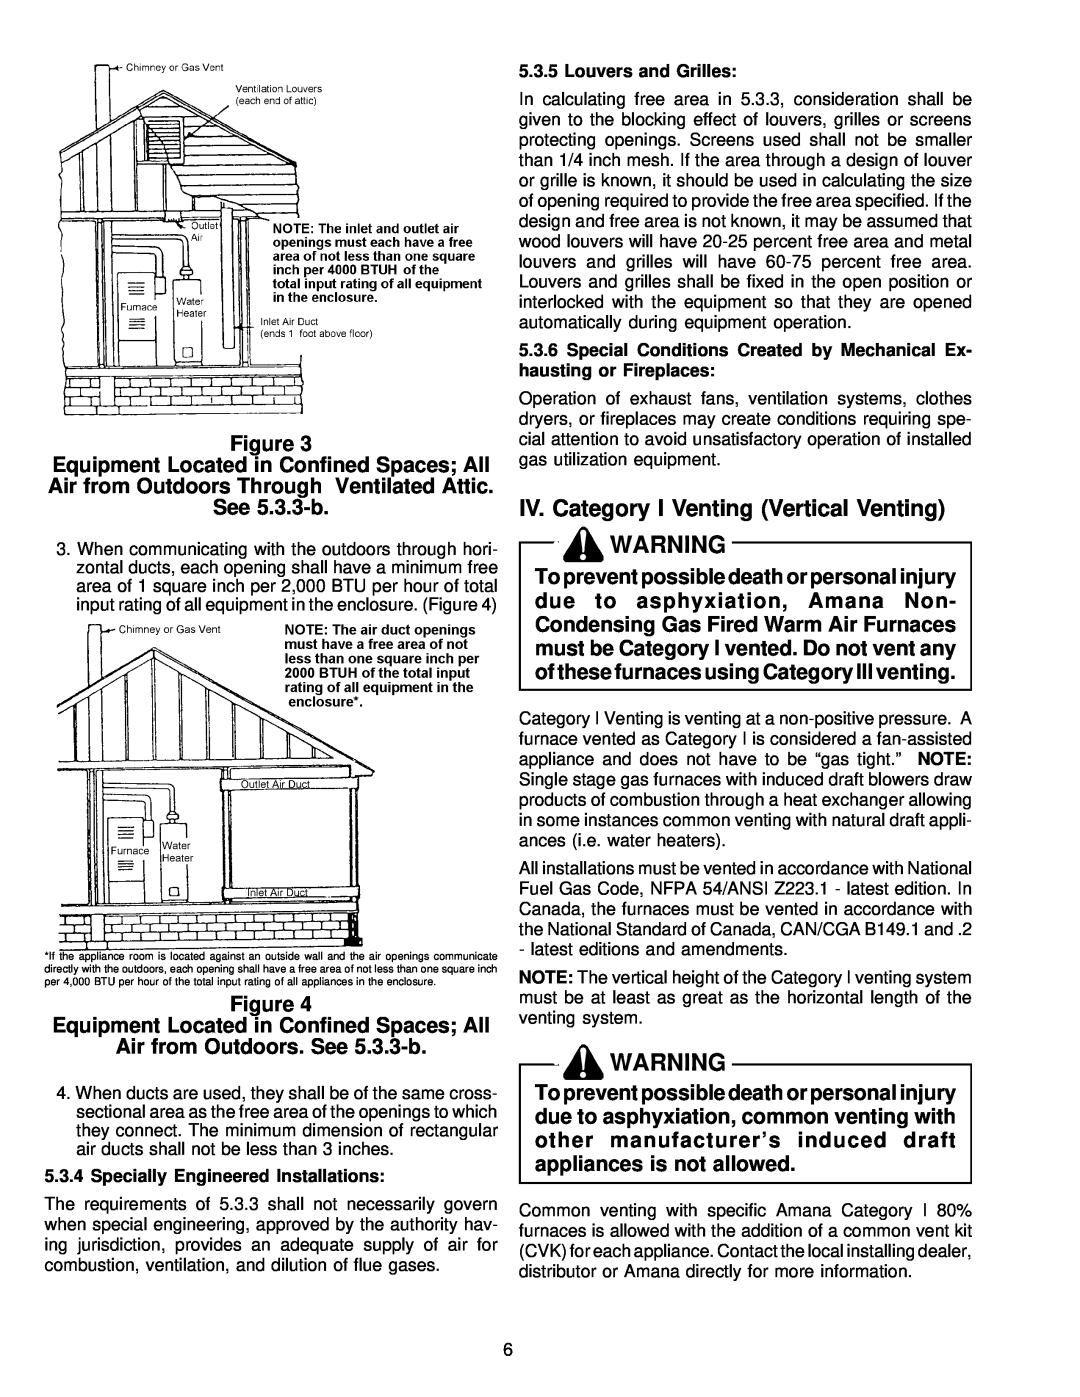 Amana VR8205 installation instructions IV. Category I Venting Vertical Venting, Air from Outdoors. See 5.3.3-b 